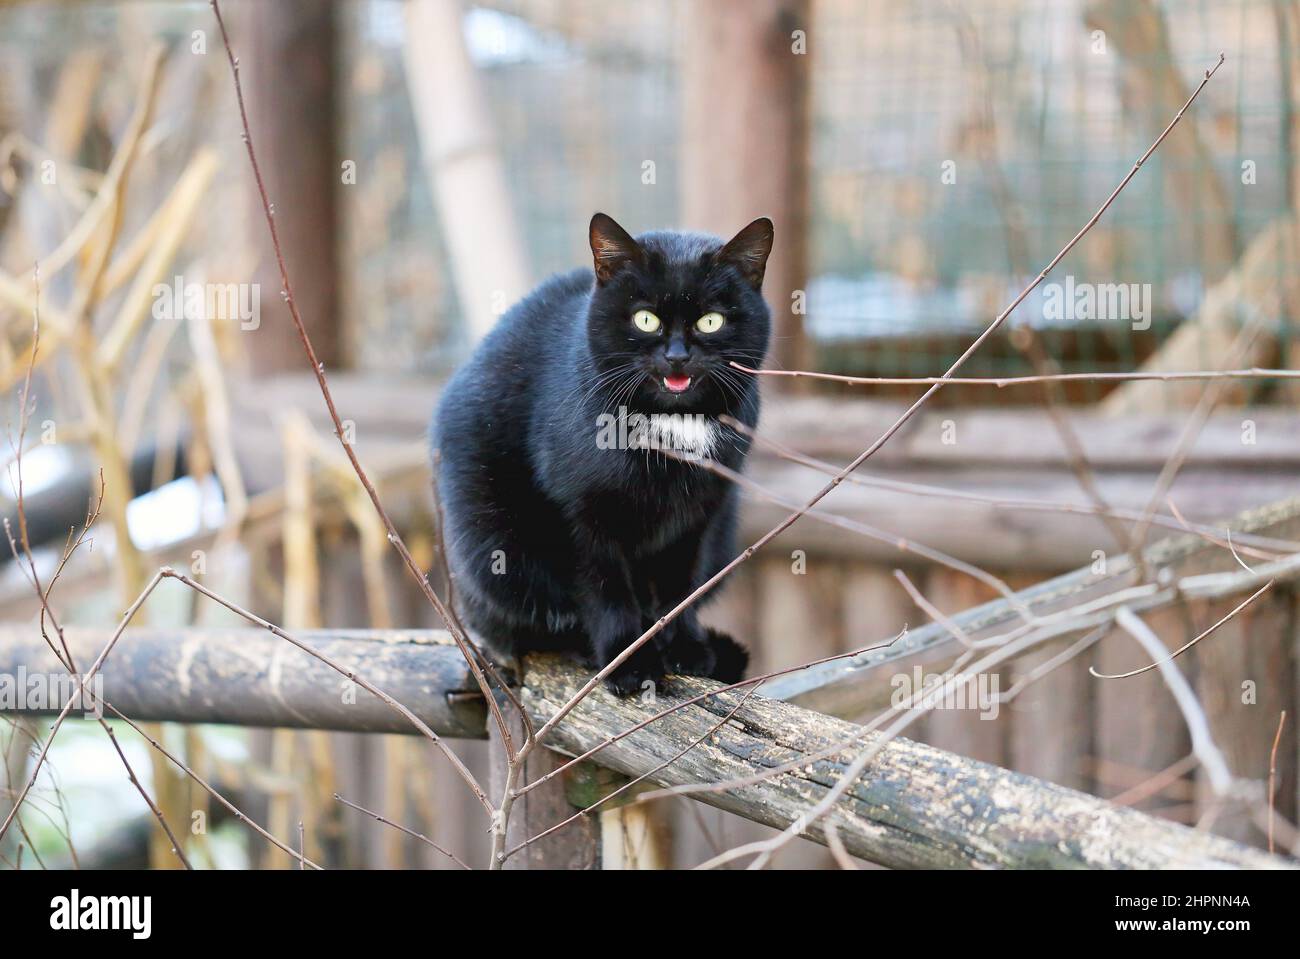 A beautiful black cat sitting on a branch photographed in close up Stock Photo